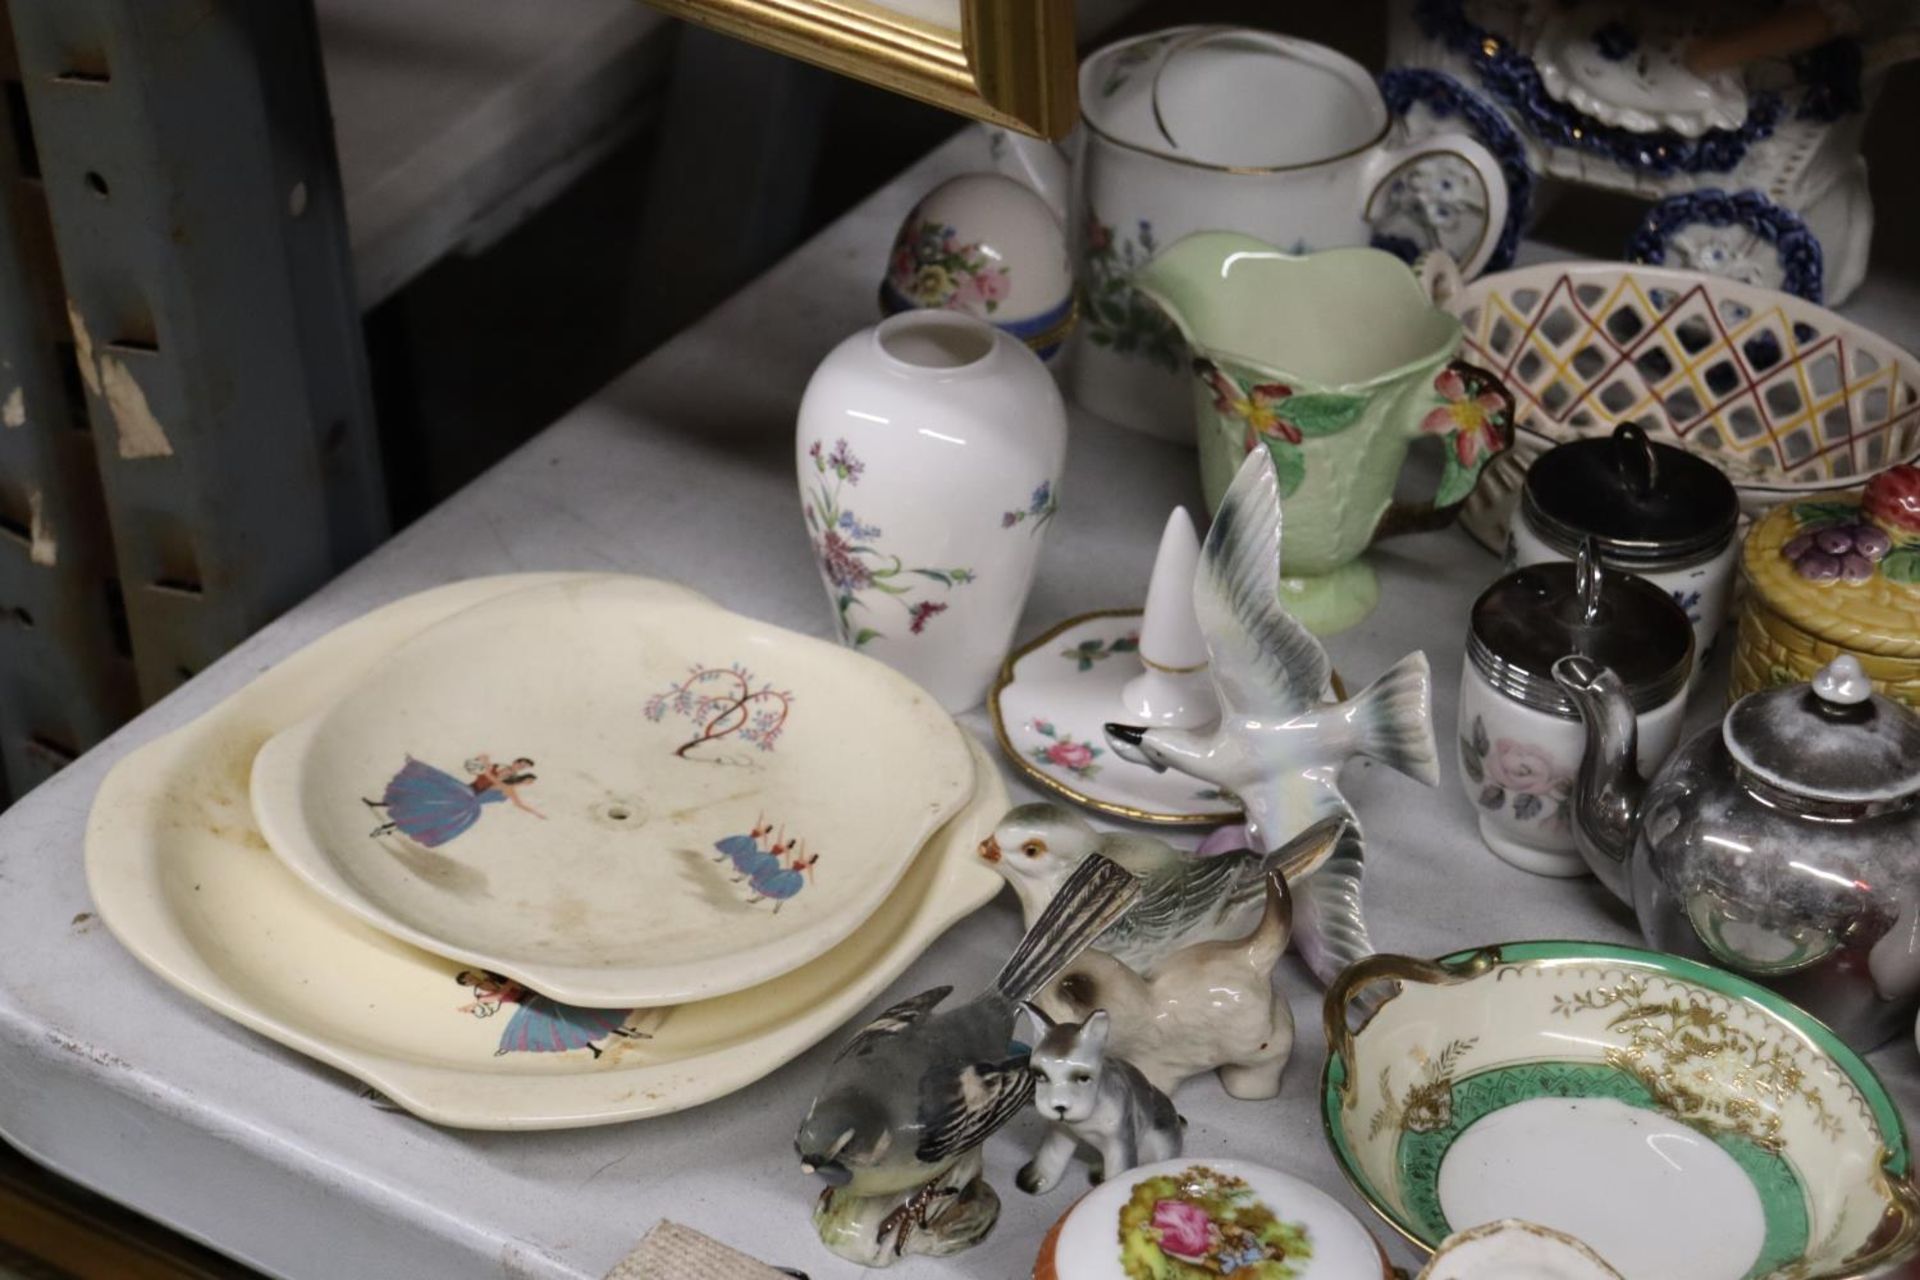 A LARGE, VINTAGE COLLECTION OF CERAMICS TO INCLUDE FIGURES, BIRDS, JUGS, BOWLS, SMALL PLATES, ETC - Image 5 of 6